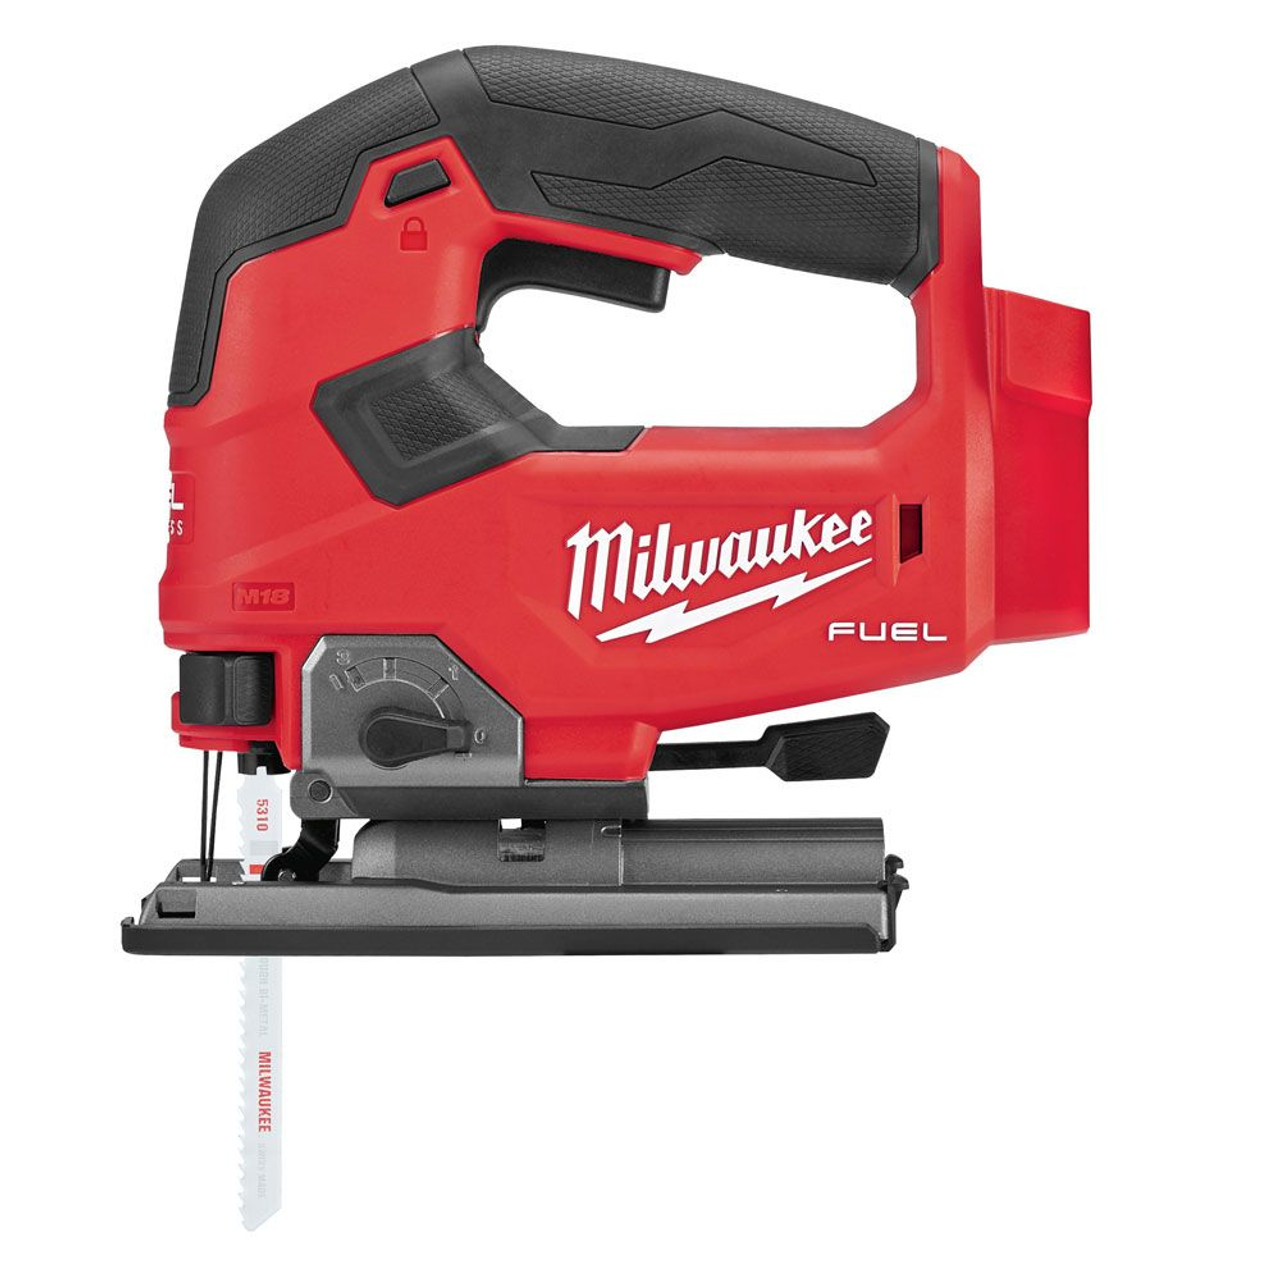 Milwaukee MIL-2737-20 M18 FUEL D-Handle Jig Saw (Tool Only